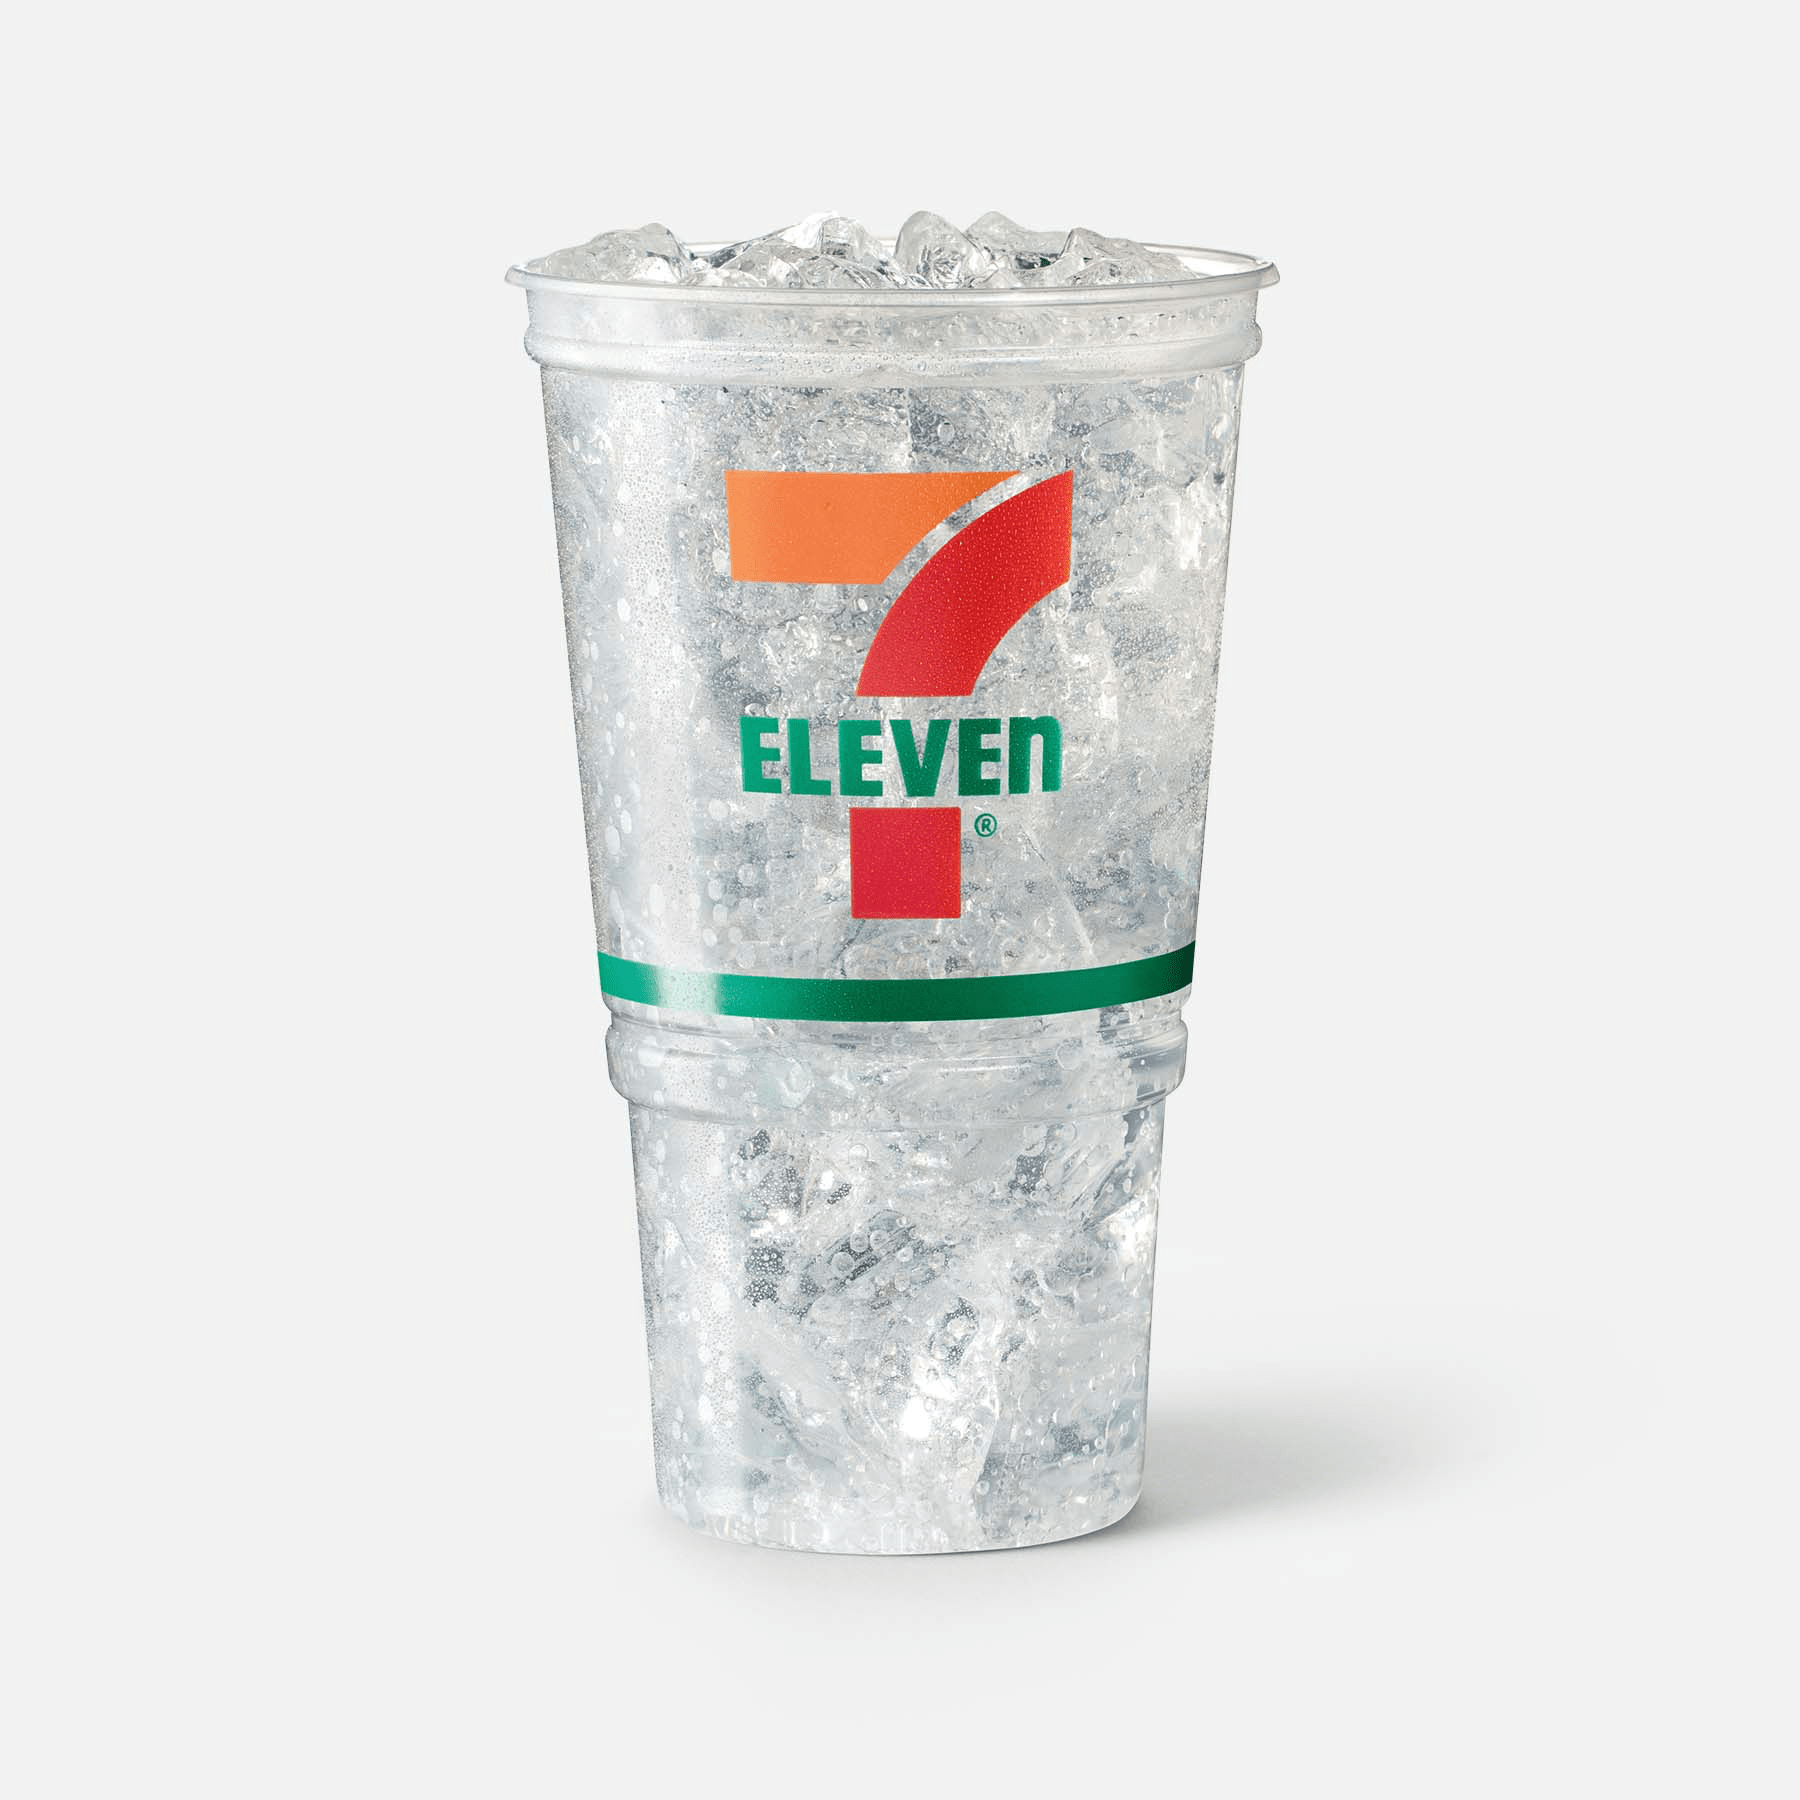 Sleeve Of Unused Large Big Gulp Clear Plastic Cups From 7-ELEVEN 7